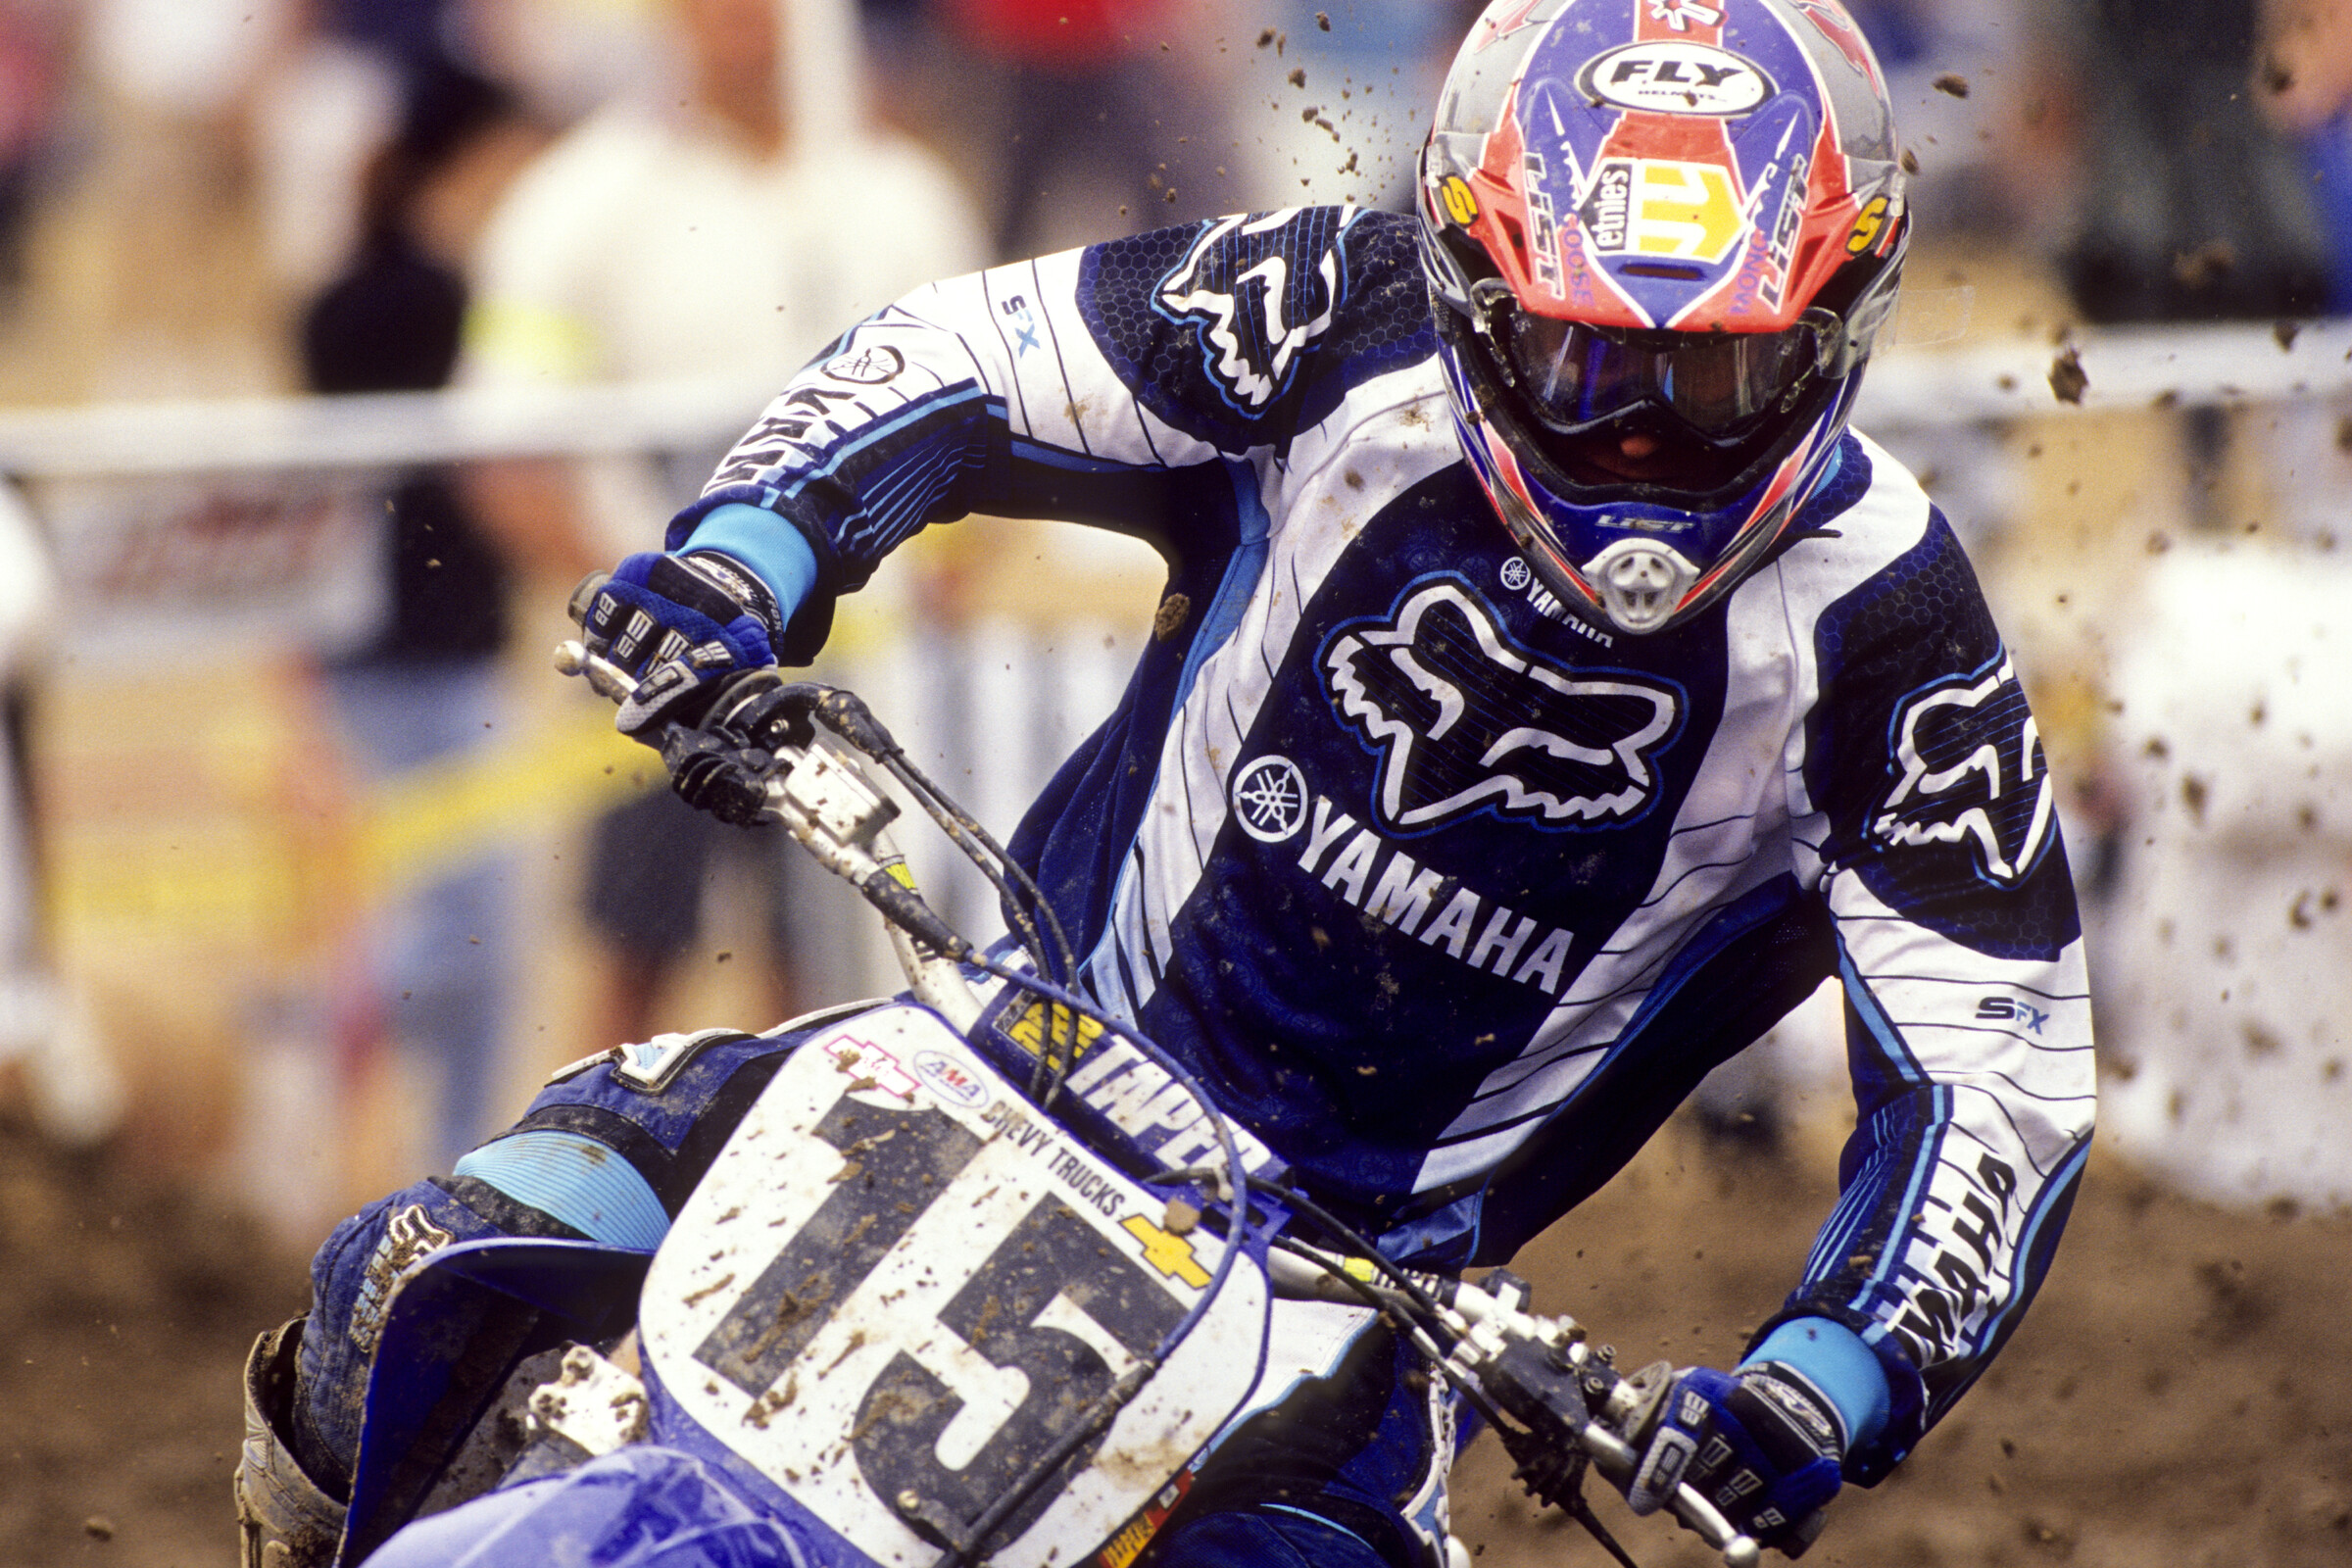 Steve Matthes 15 Reasons to Celebrate Tim Ferry on His Birthday image